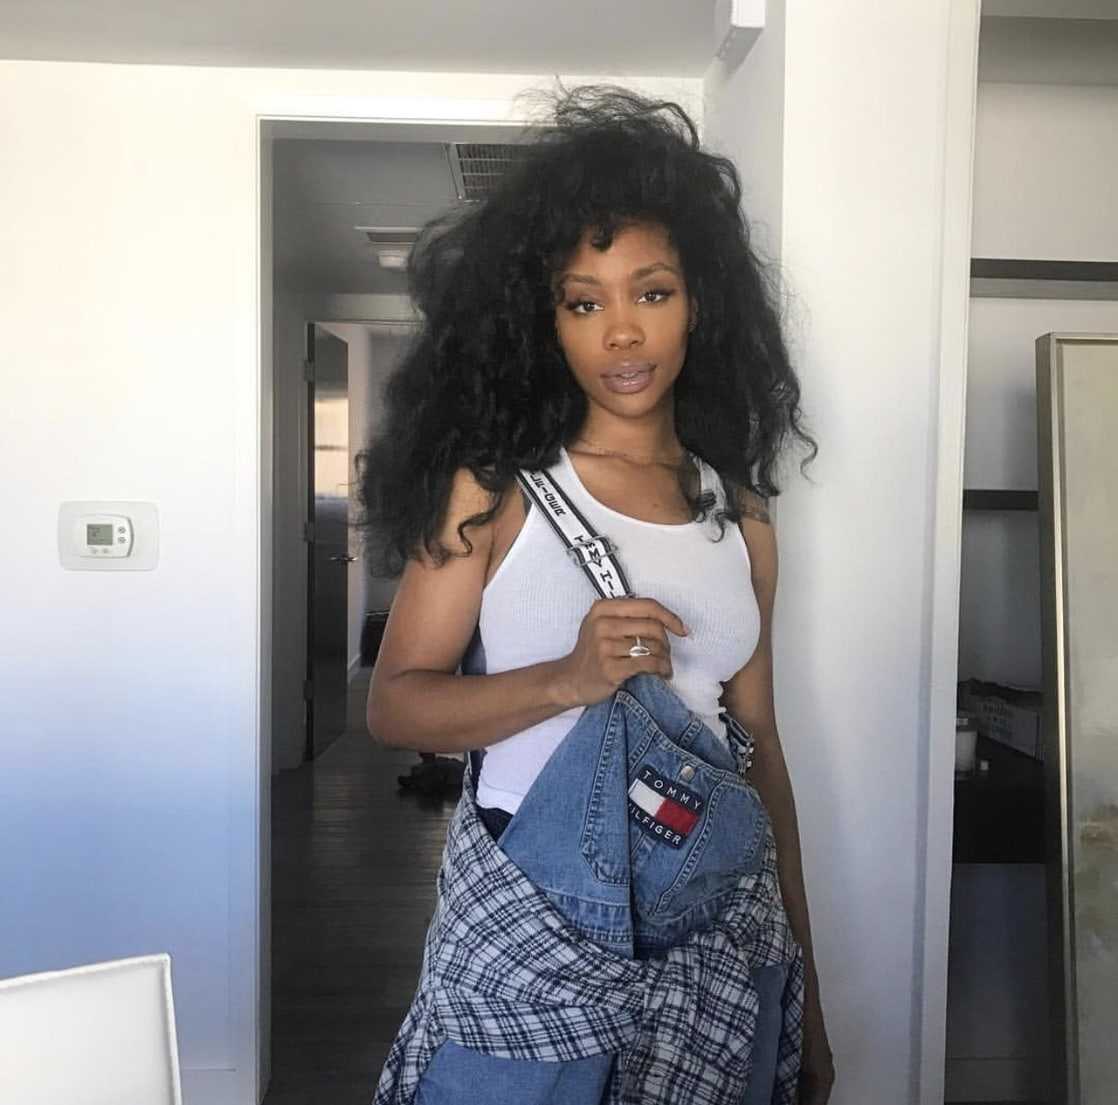 51 Sexy SZA Boobs Pictures Which Make Certain To Leave You Entranced | Best Of Comic Books